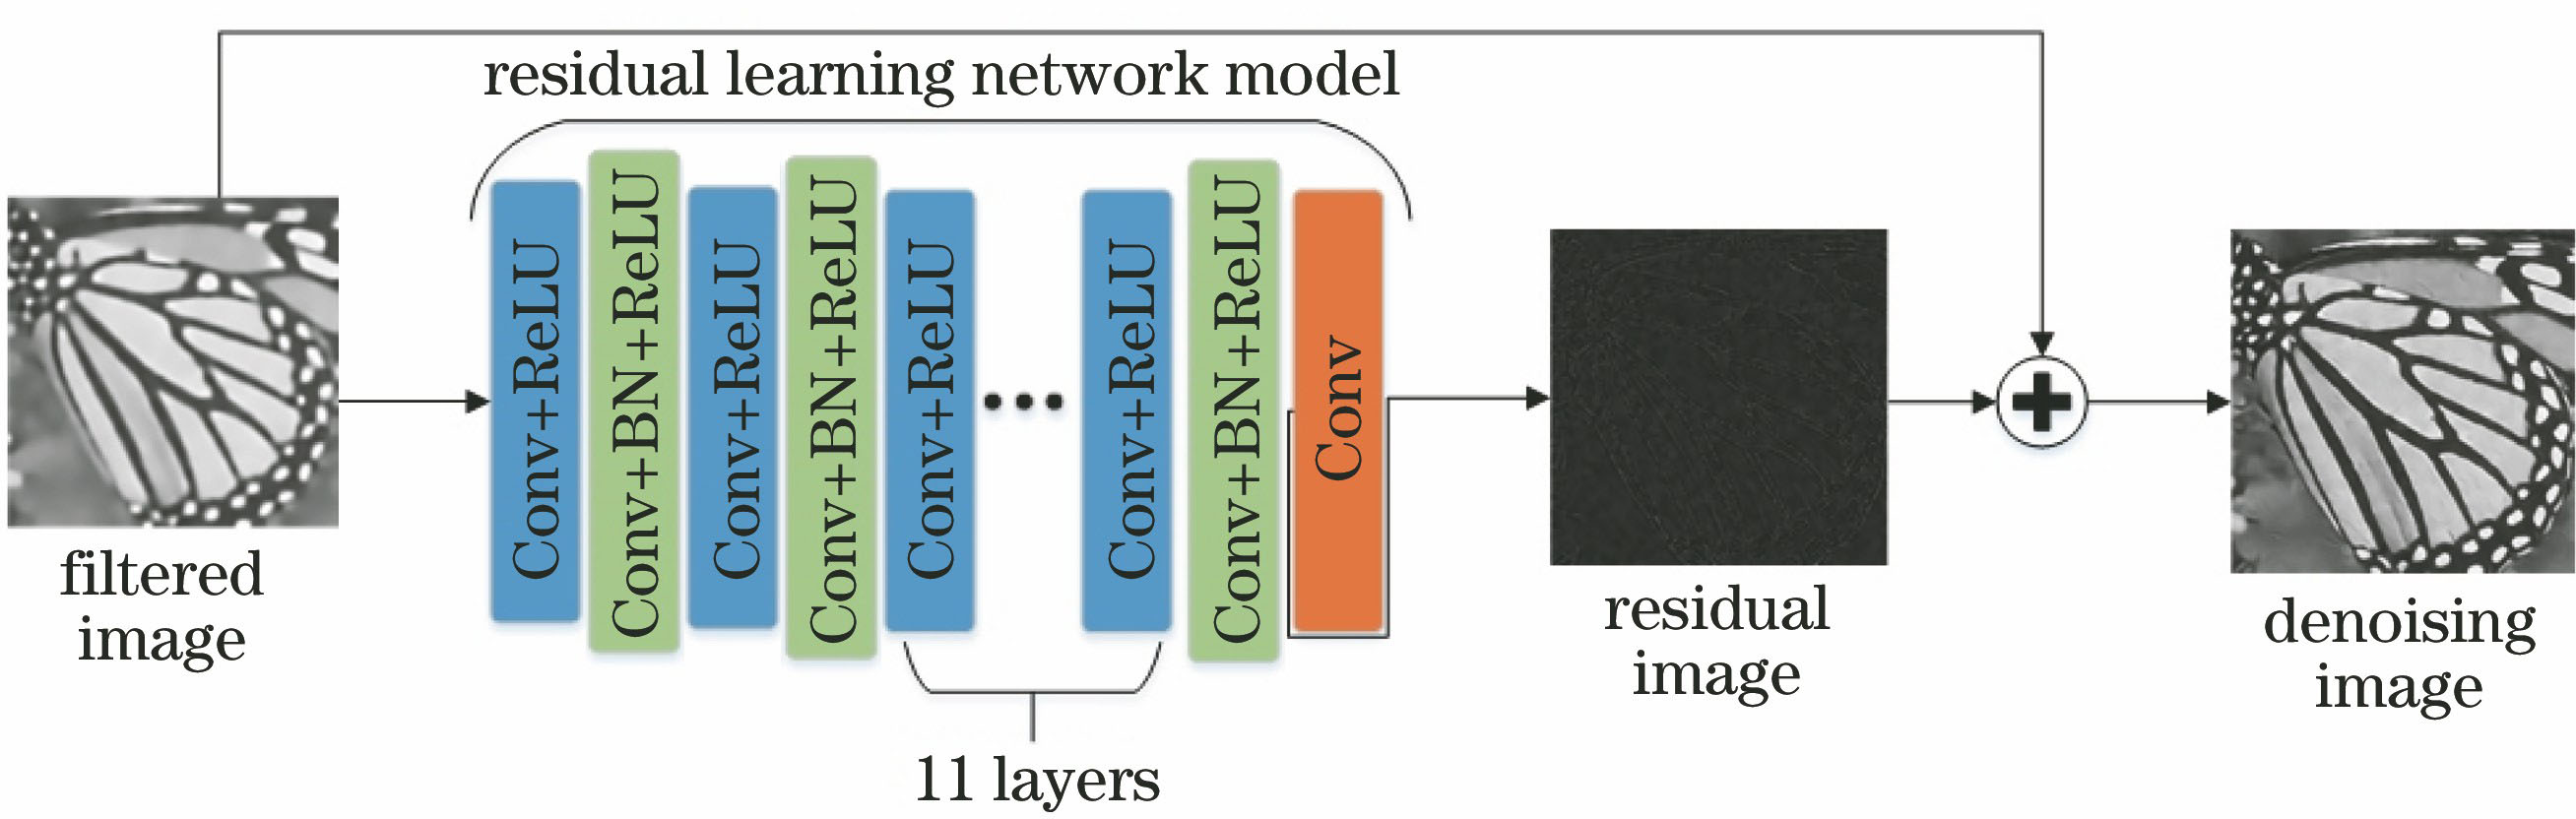 Network structure of residual learning